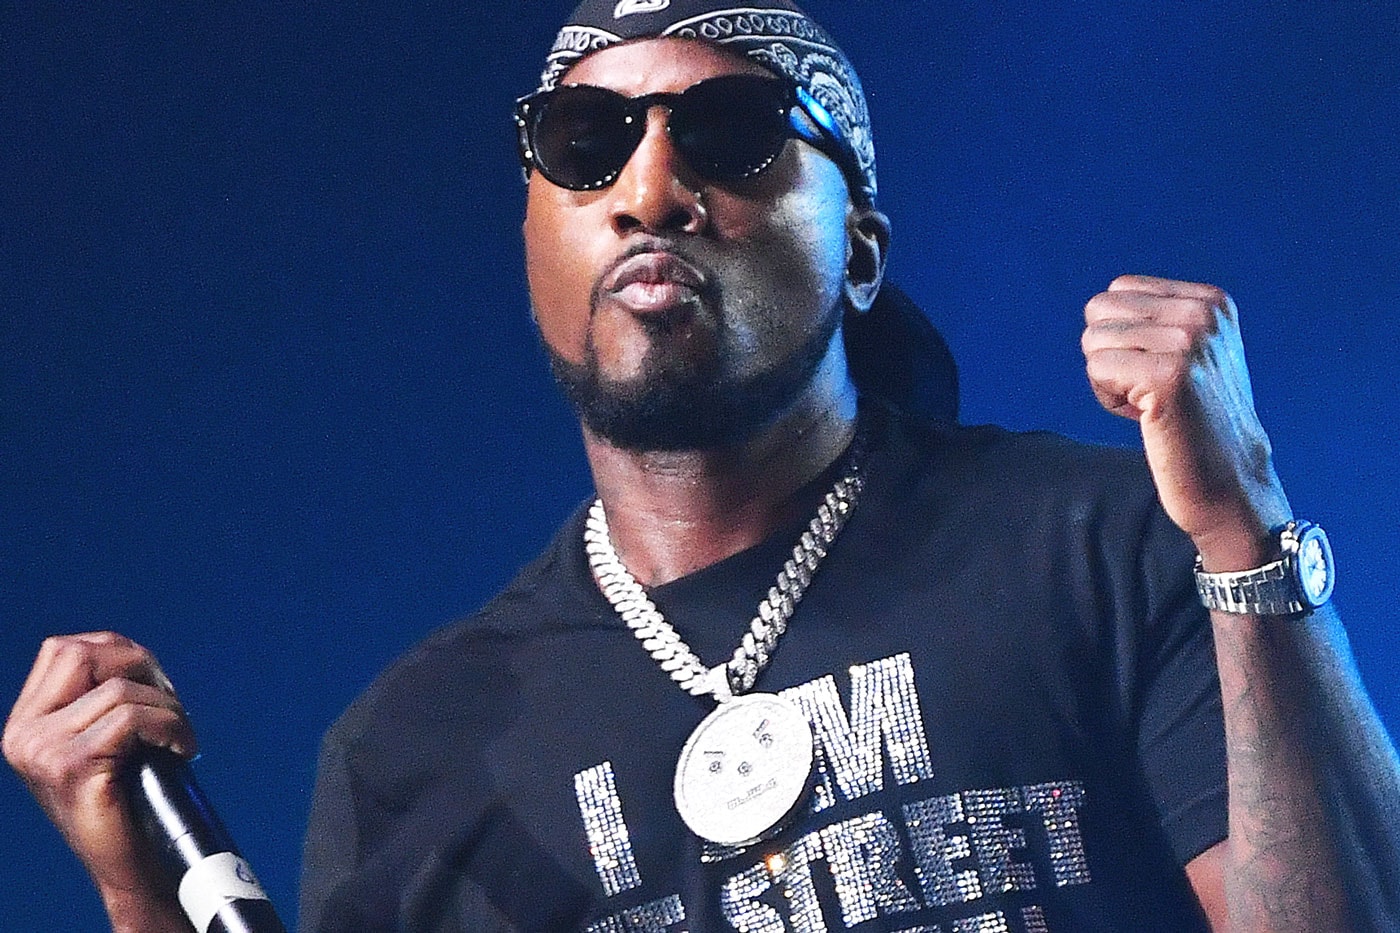 Jeezy Announces 'Church In These Streets' Tour